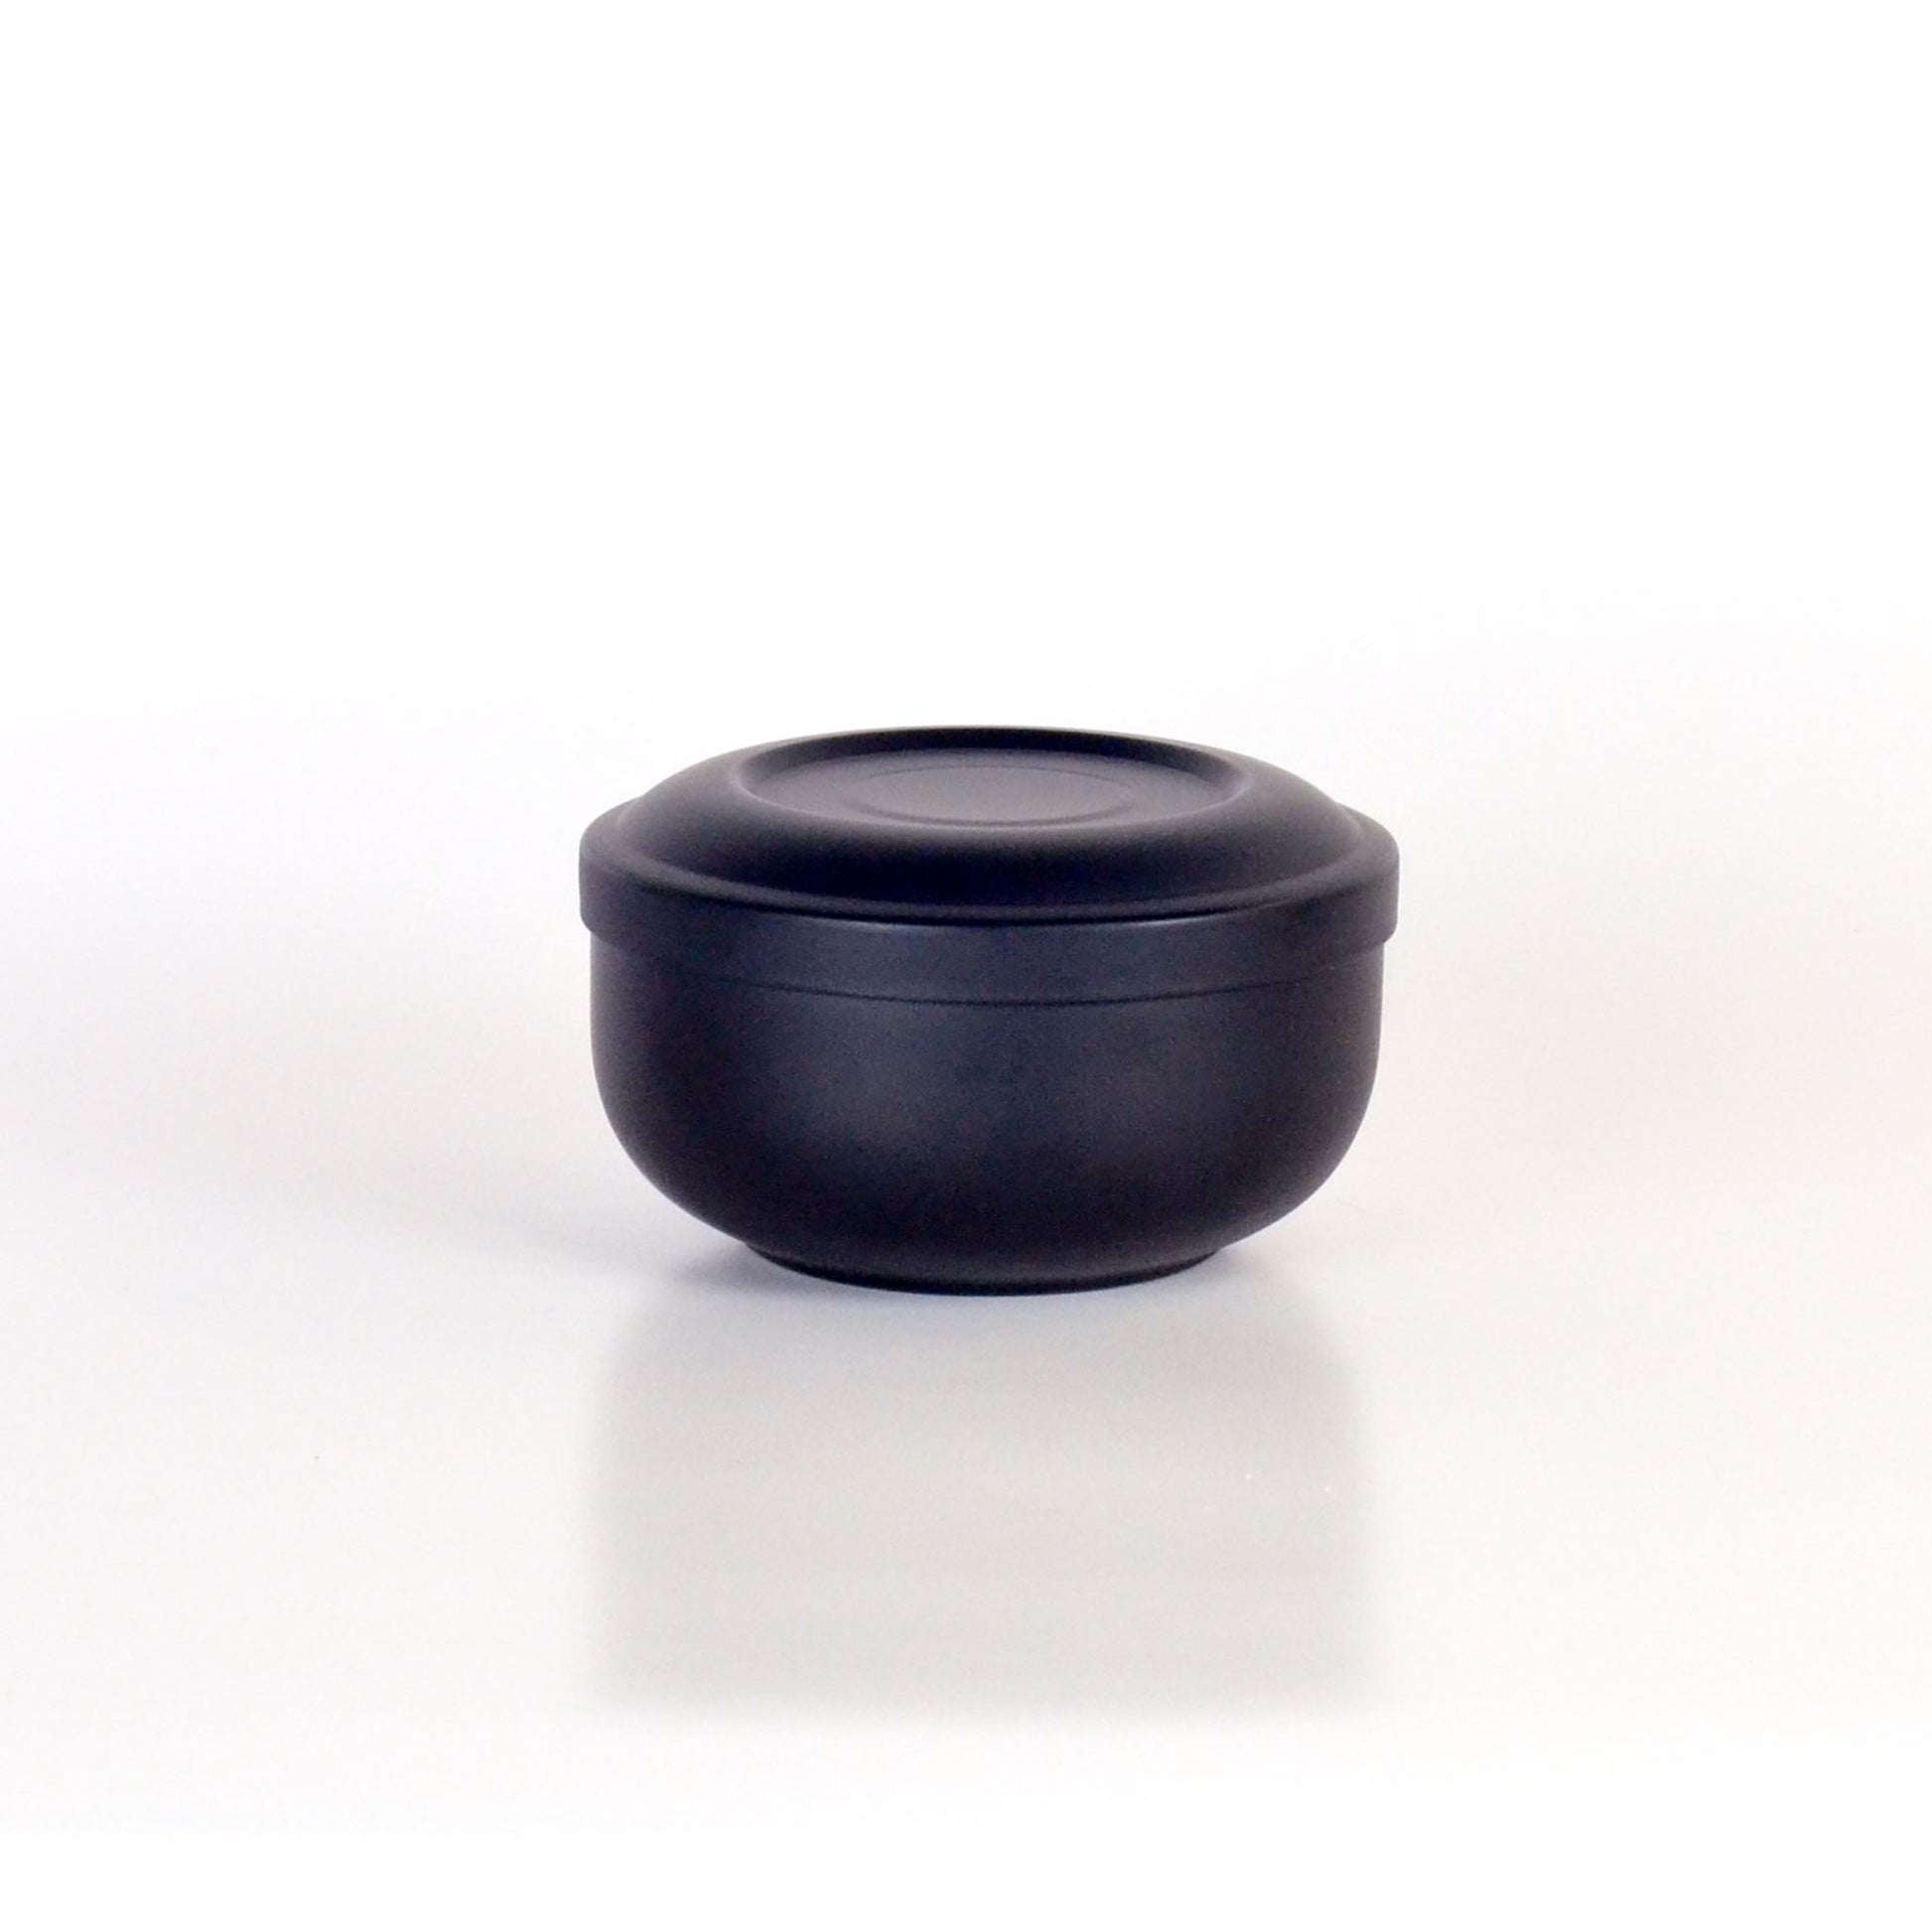 Classic stainless steel shaving bowl in matte black with snug lid